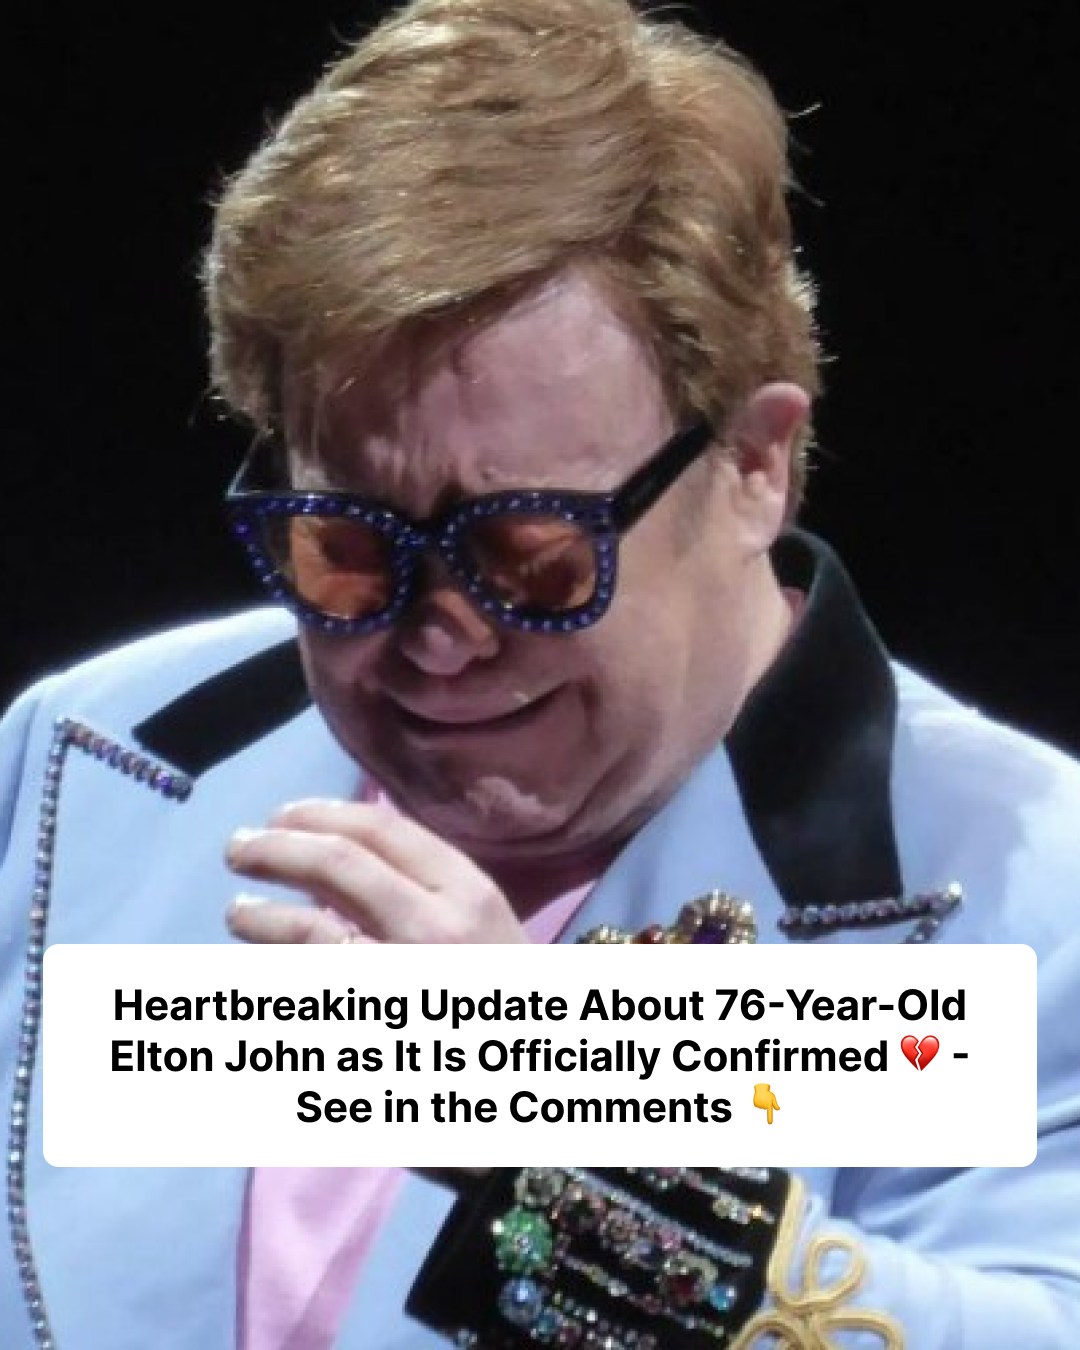 Heartbreaking Update About the Cherished Music Icon, Elton John ...